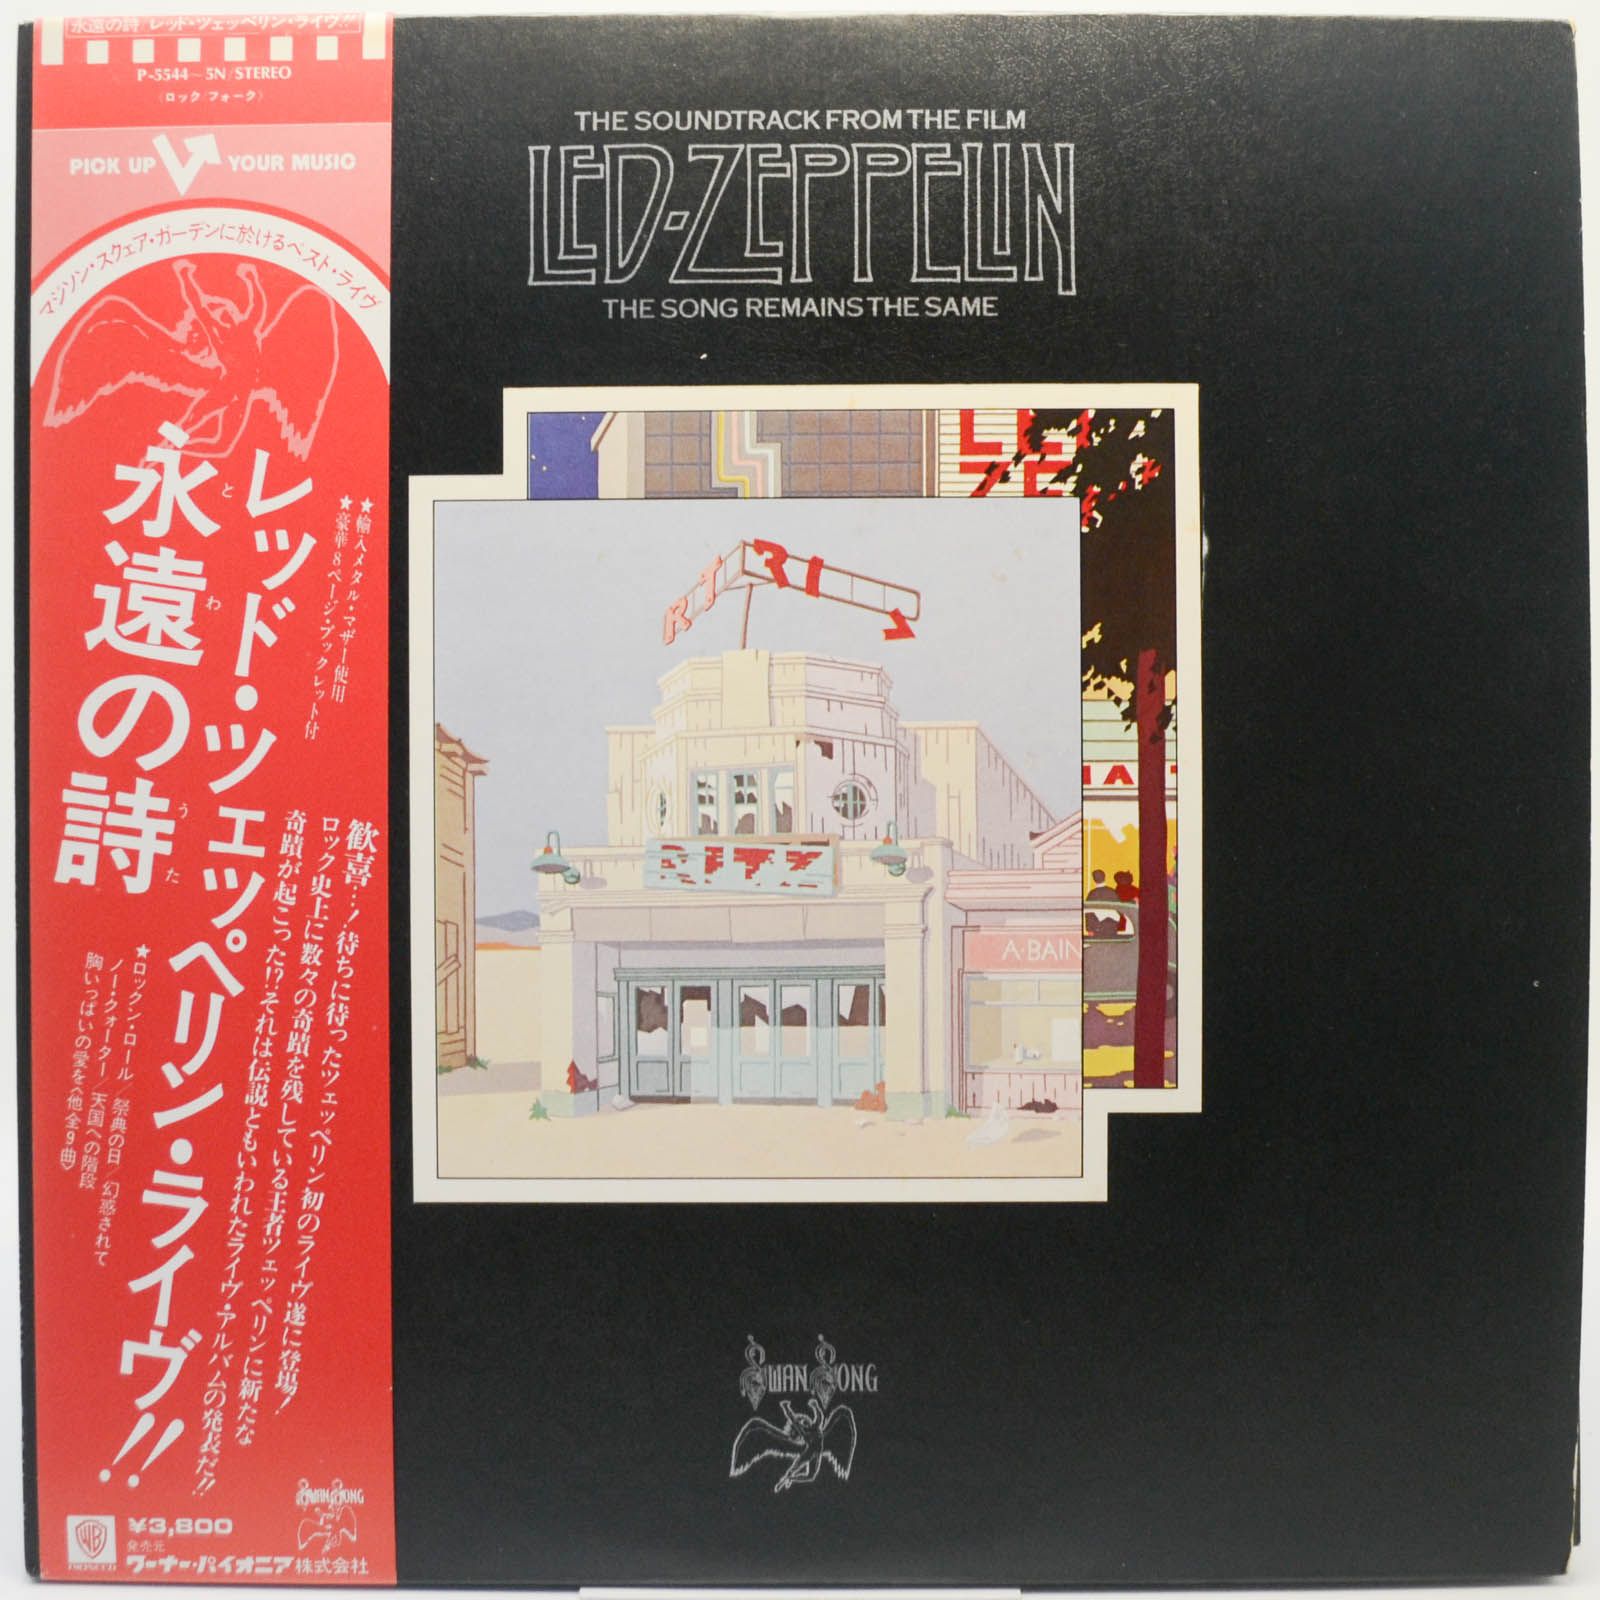 Led Zeppelin — The Soundtrack From The Film The Song Remains The Same (2LP, booklet), 1976